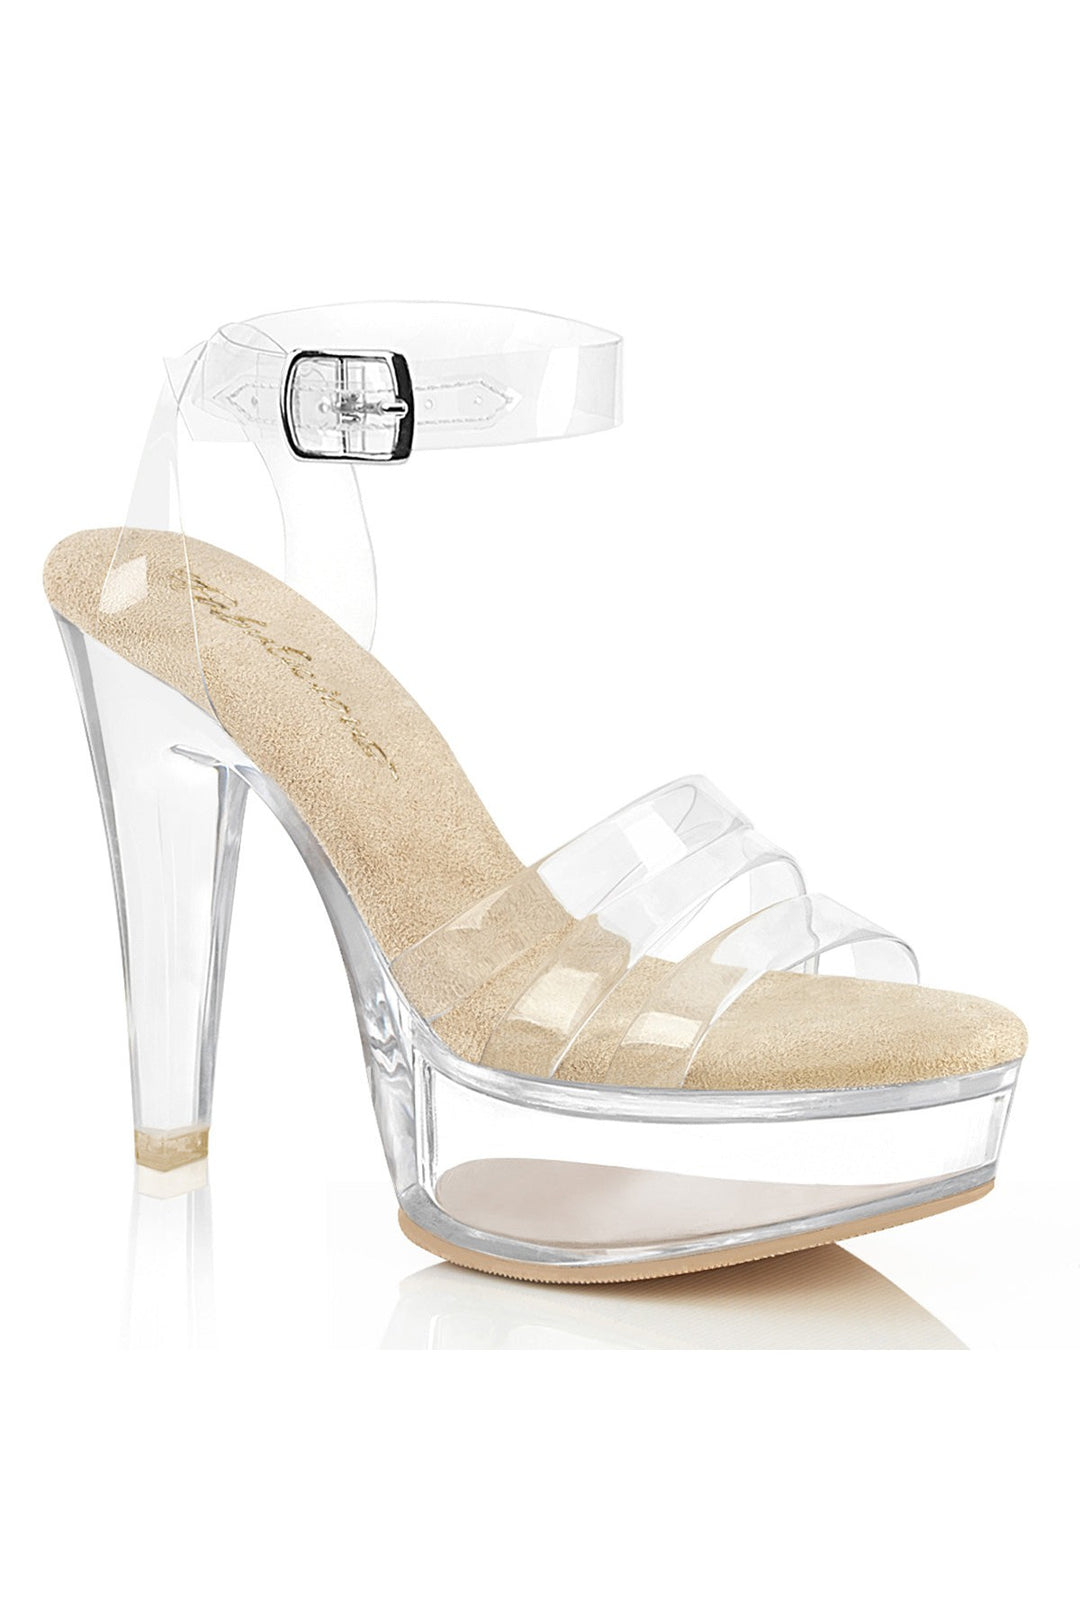 Fabulicious Clear Sandals Platform Stripper Shoes | Buy at Sexyshoes.com